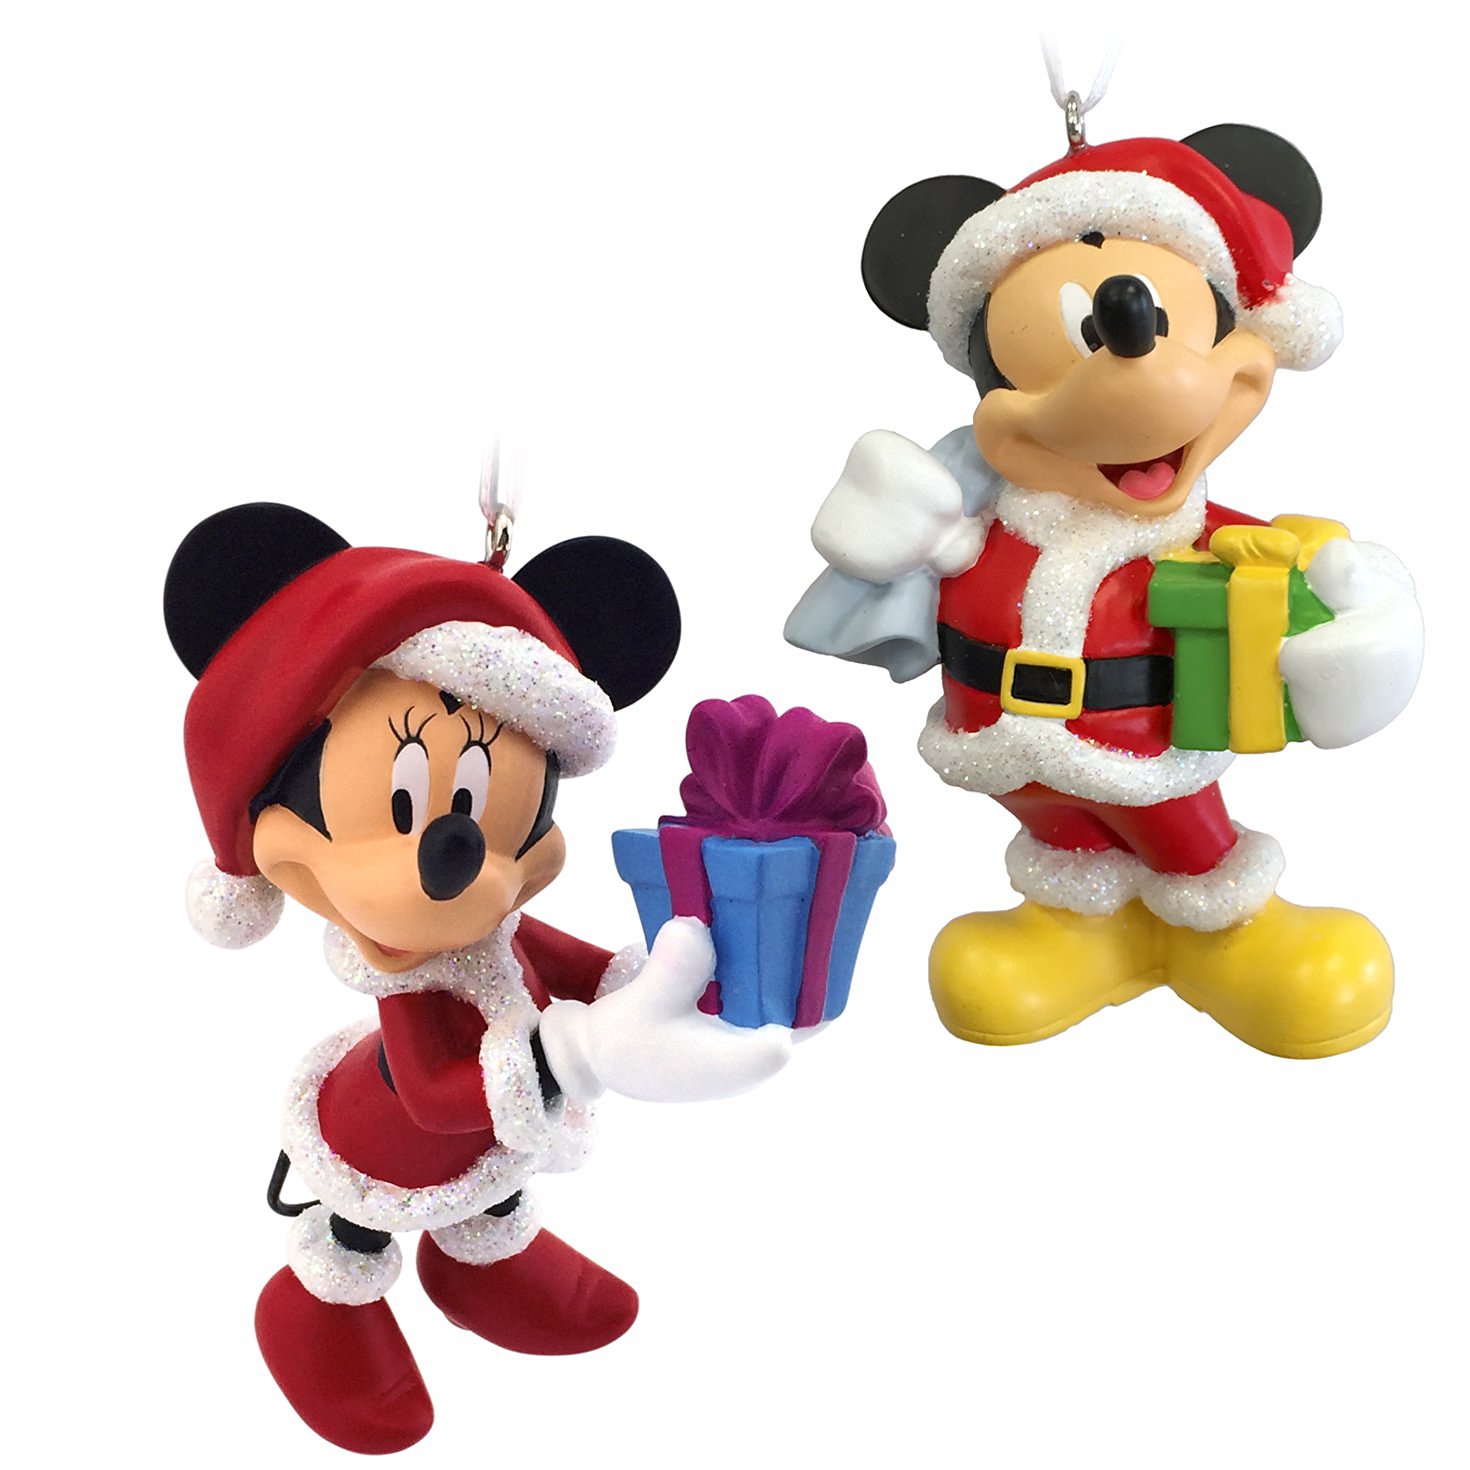 Trim the Christmas Tree with this Adorable Disney Ornament Pair